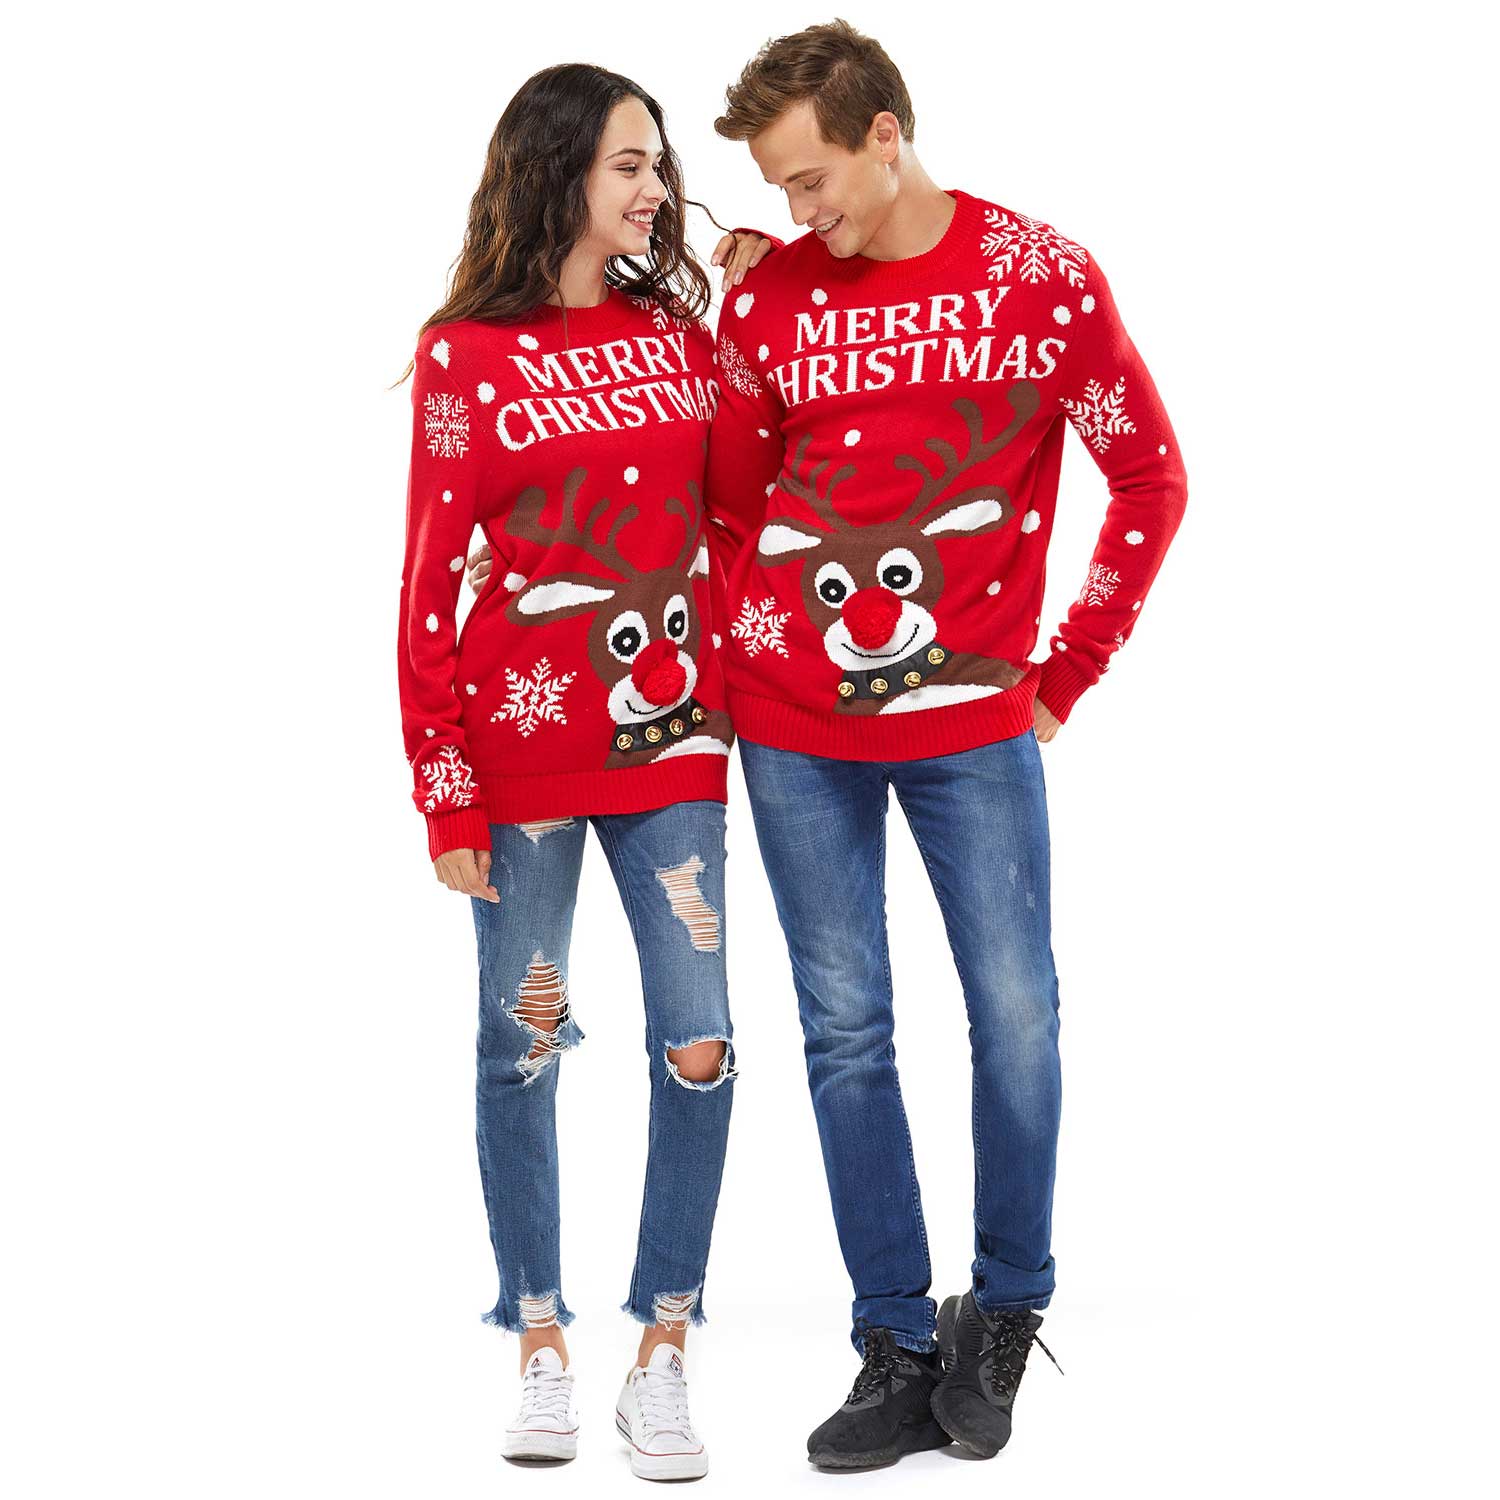 Jingle Bells Rudolph Couples Funny Ugly Christmas Sweater